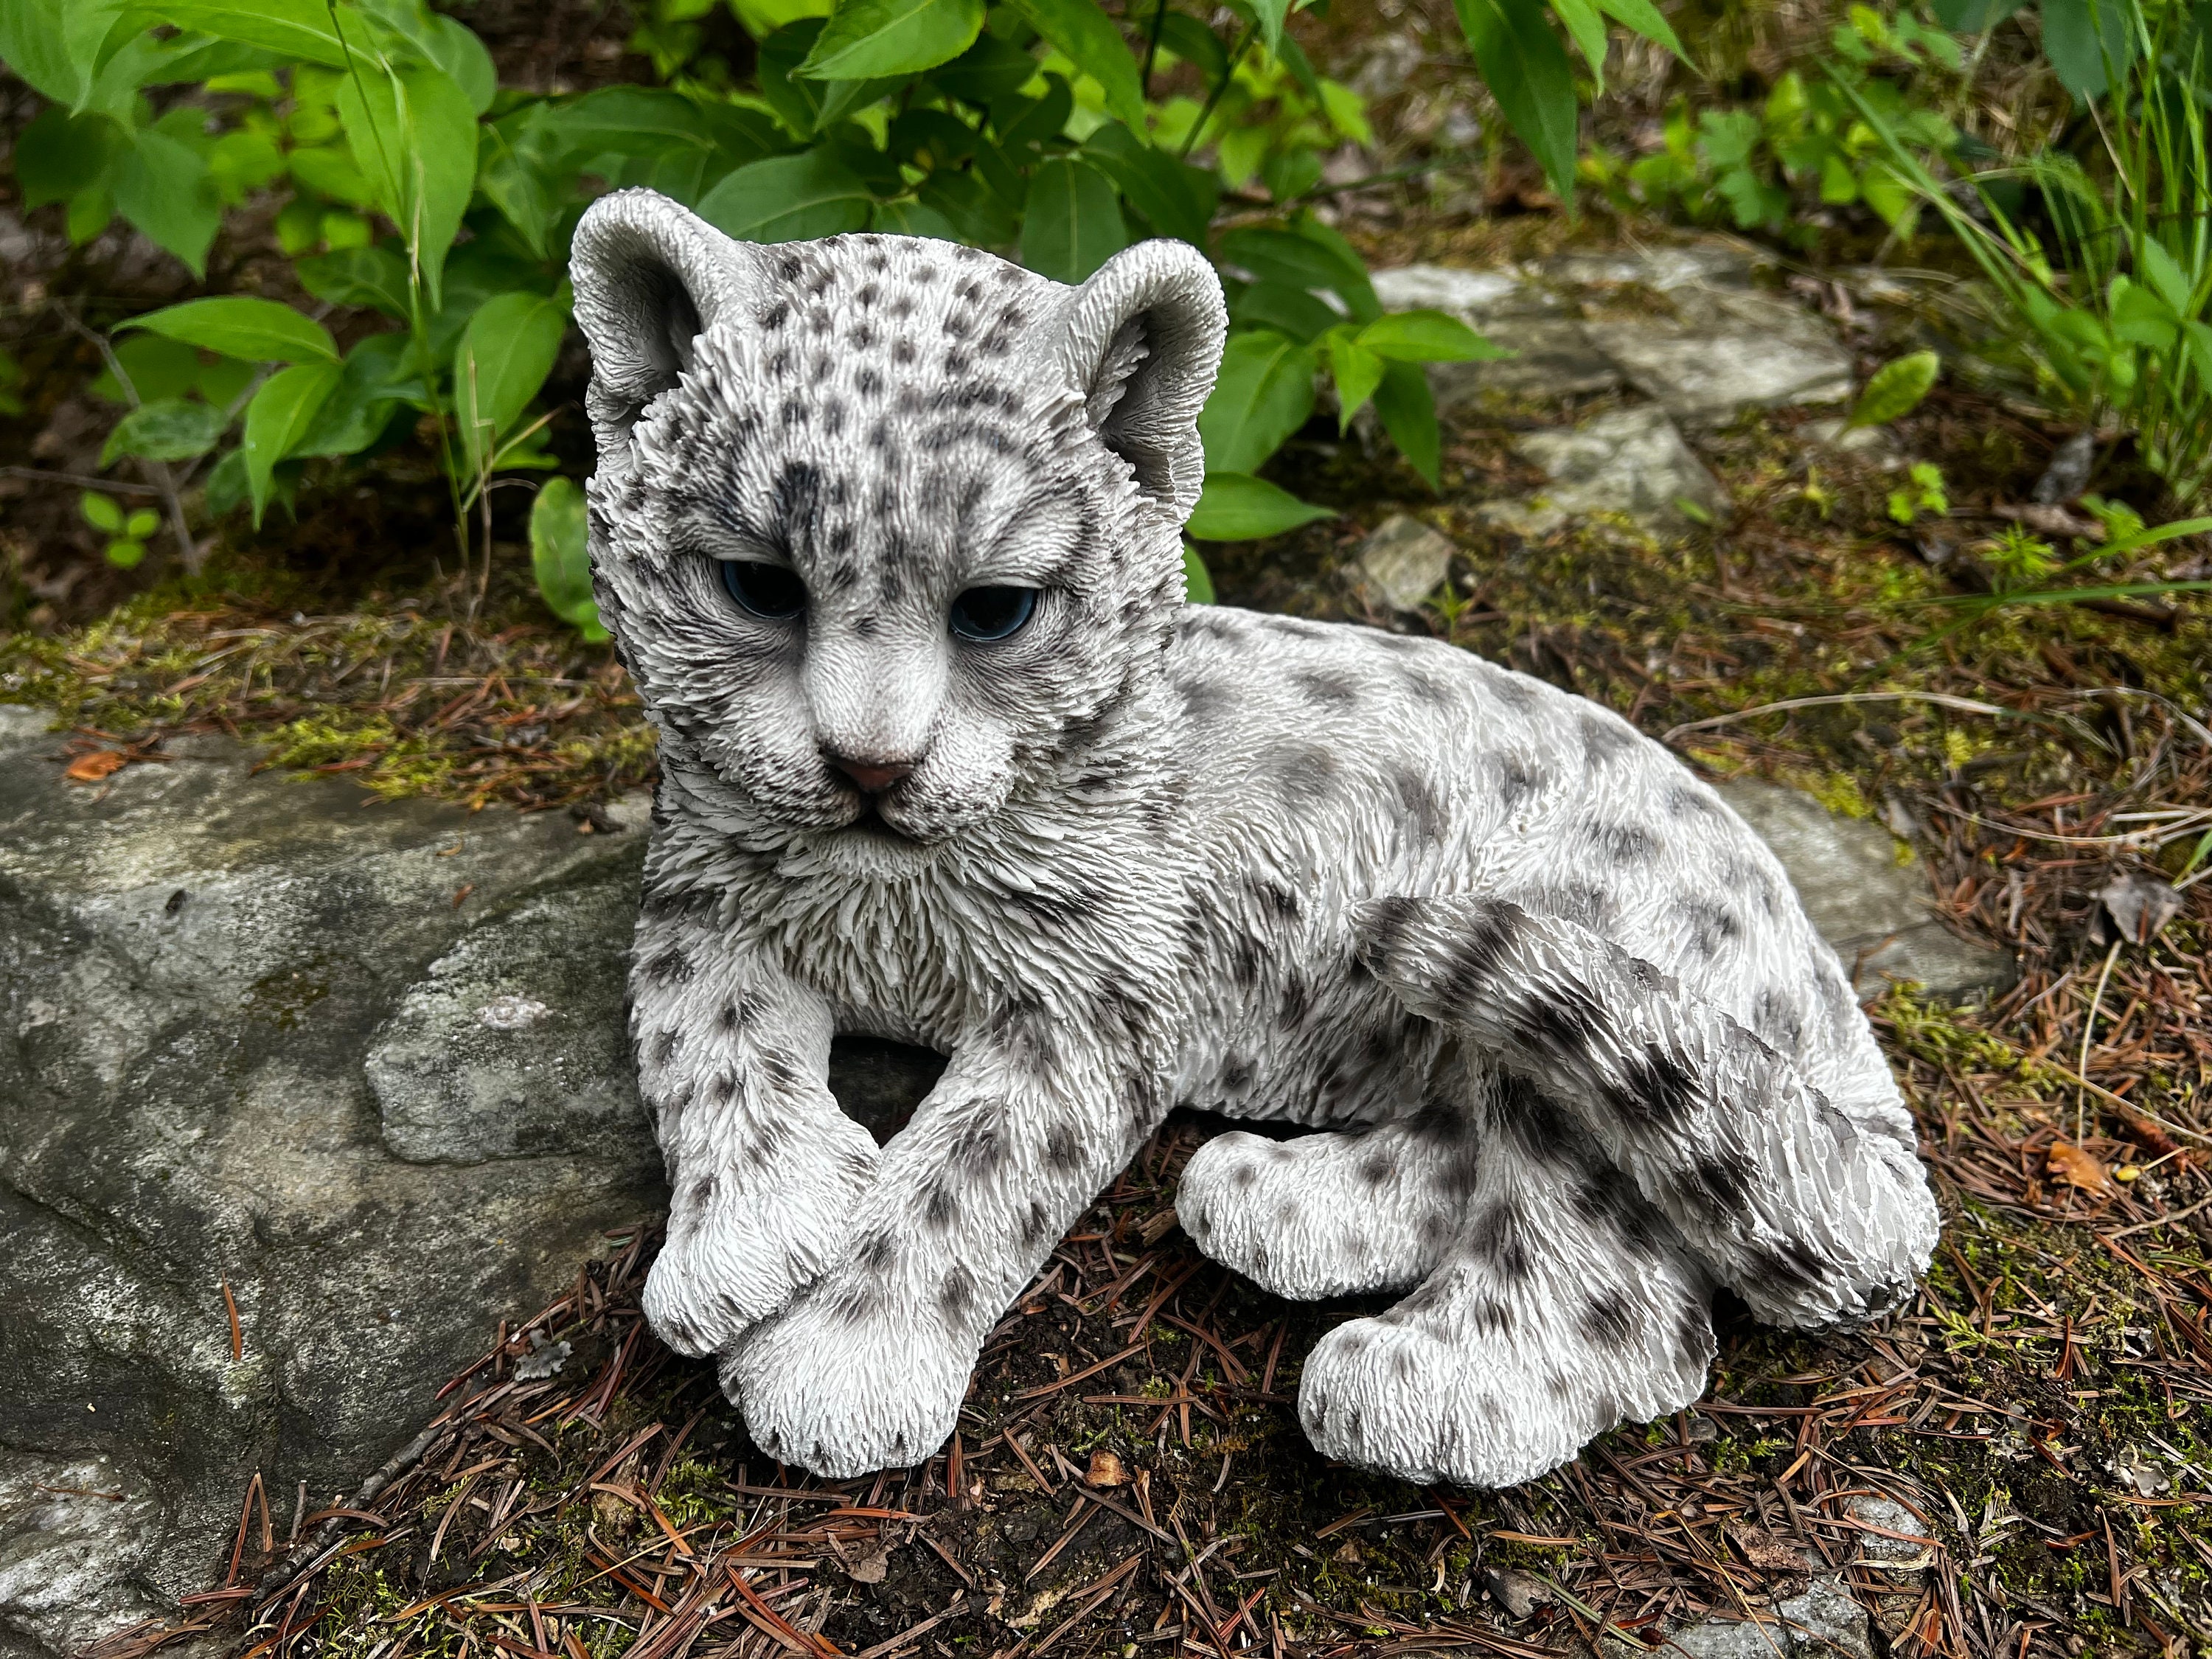 😍 'Snowy' Large Ceramic Snow Leopard Statue Vintage 😍 Starting at £450  Shop Now 👇👇